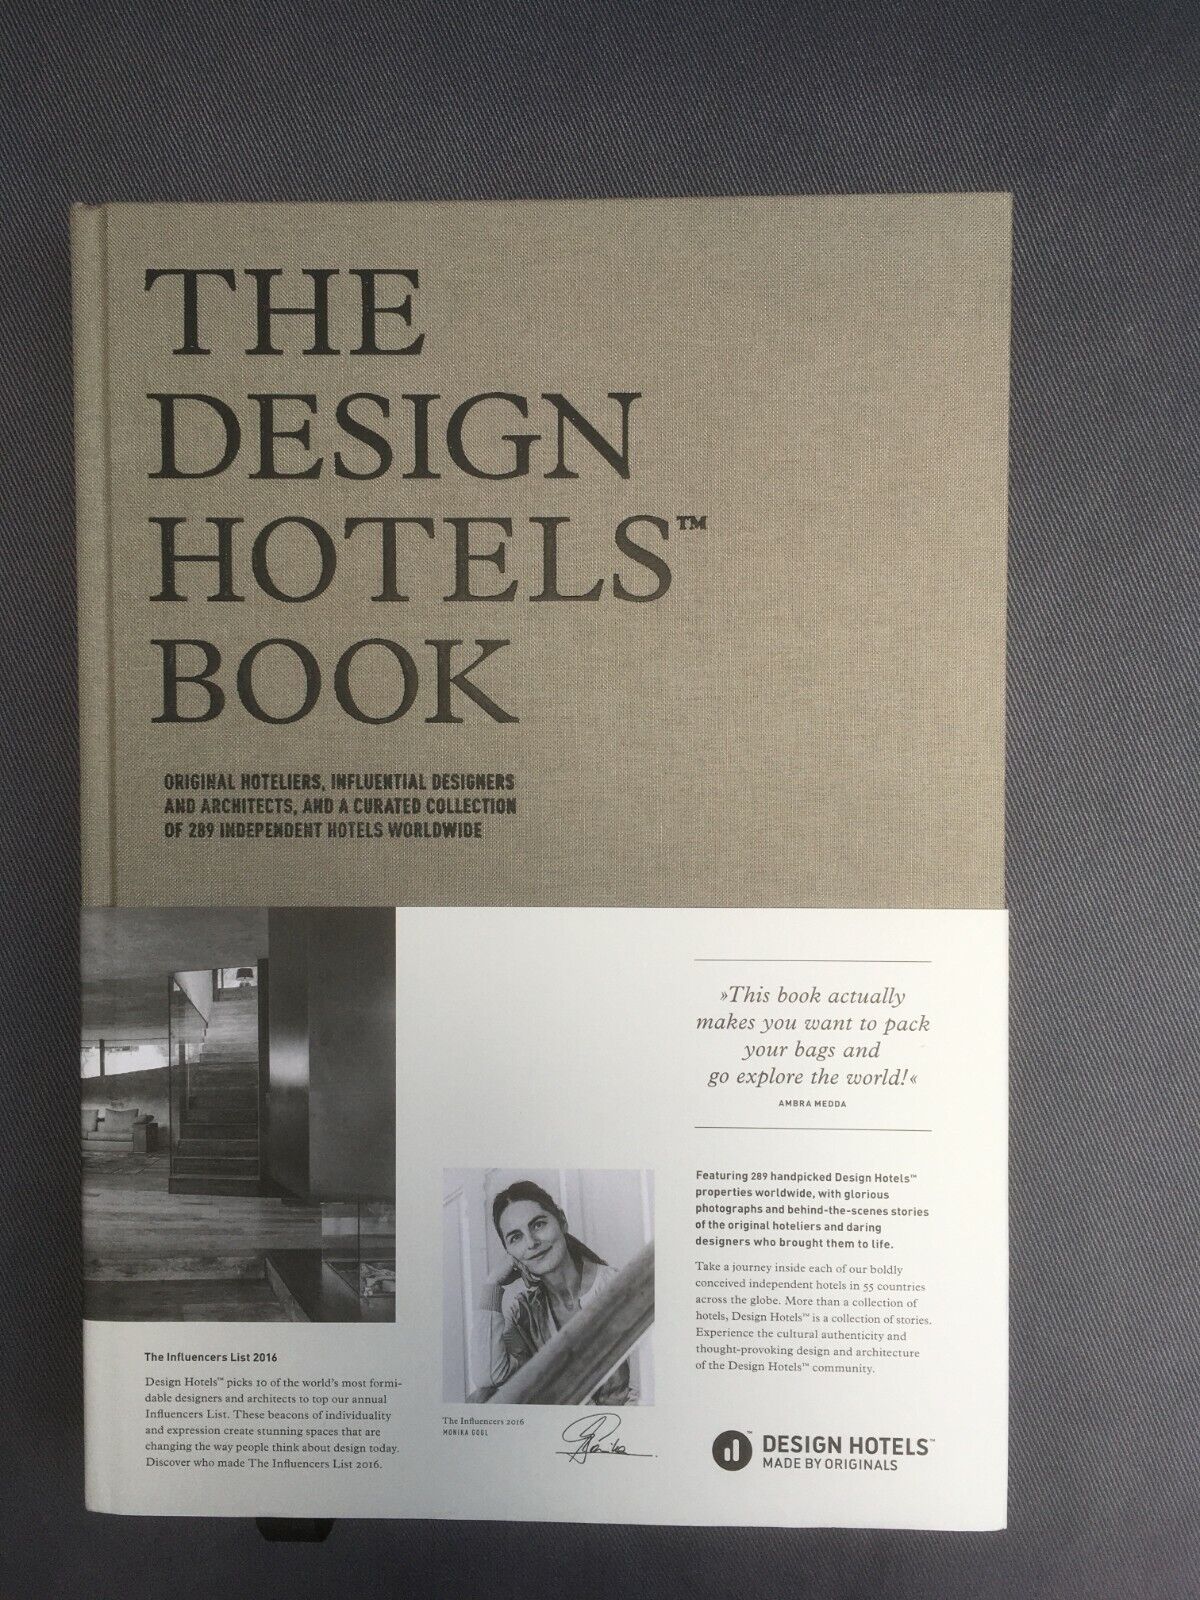 Design Hotels Book 2016 / 289 independent hotels / 55 countries across the globe - The Influencers 2016